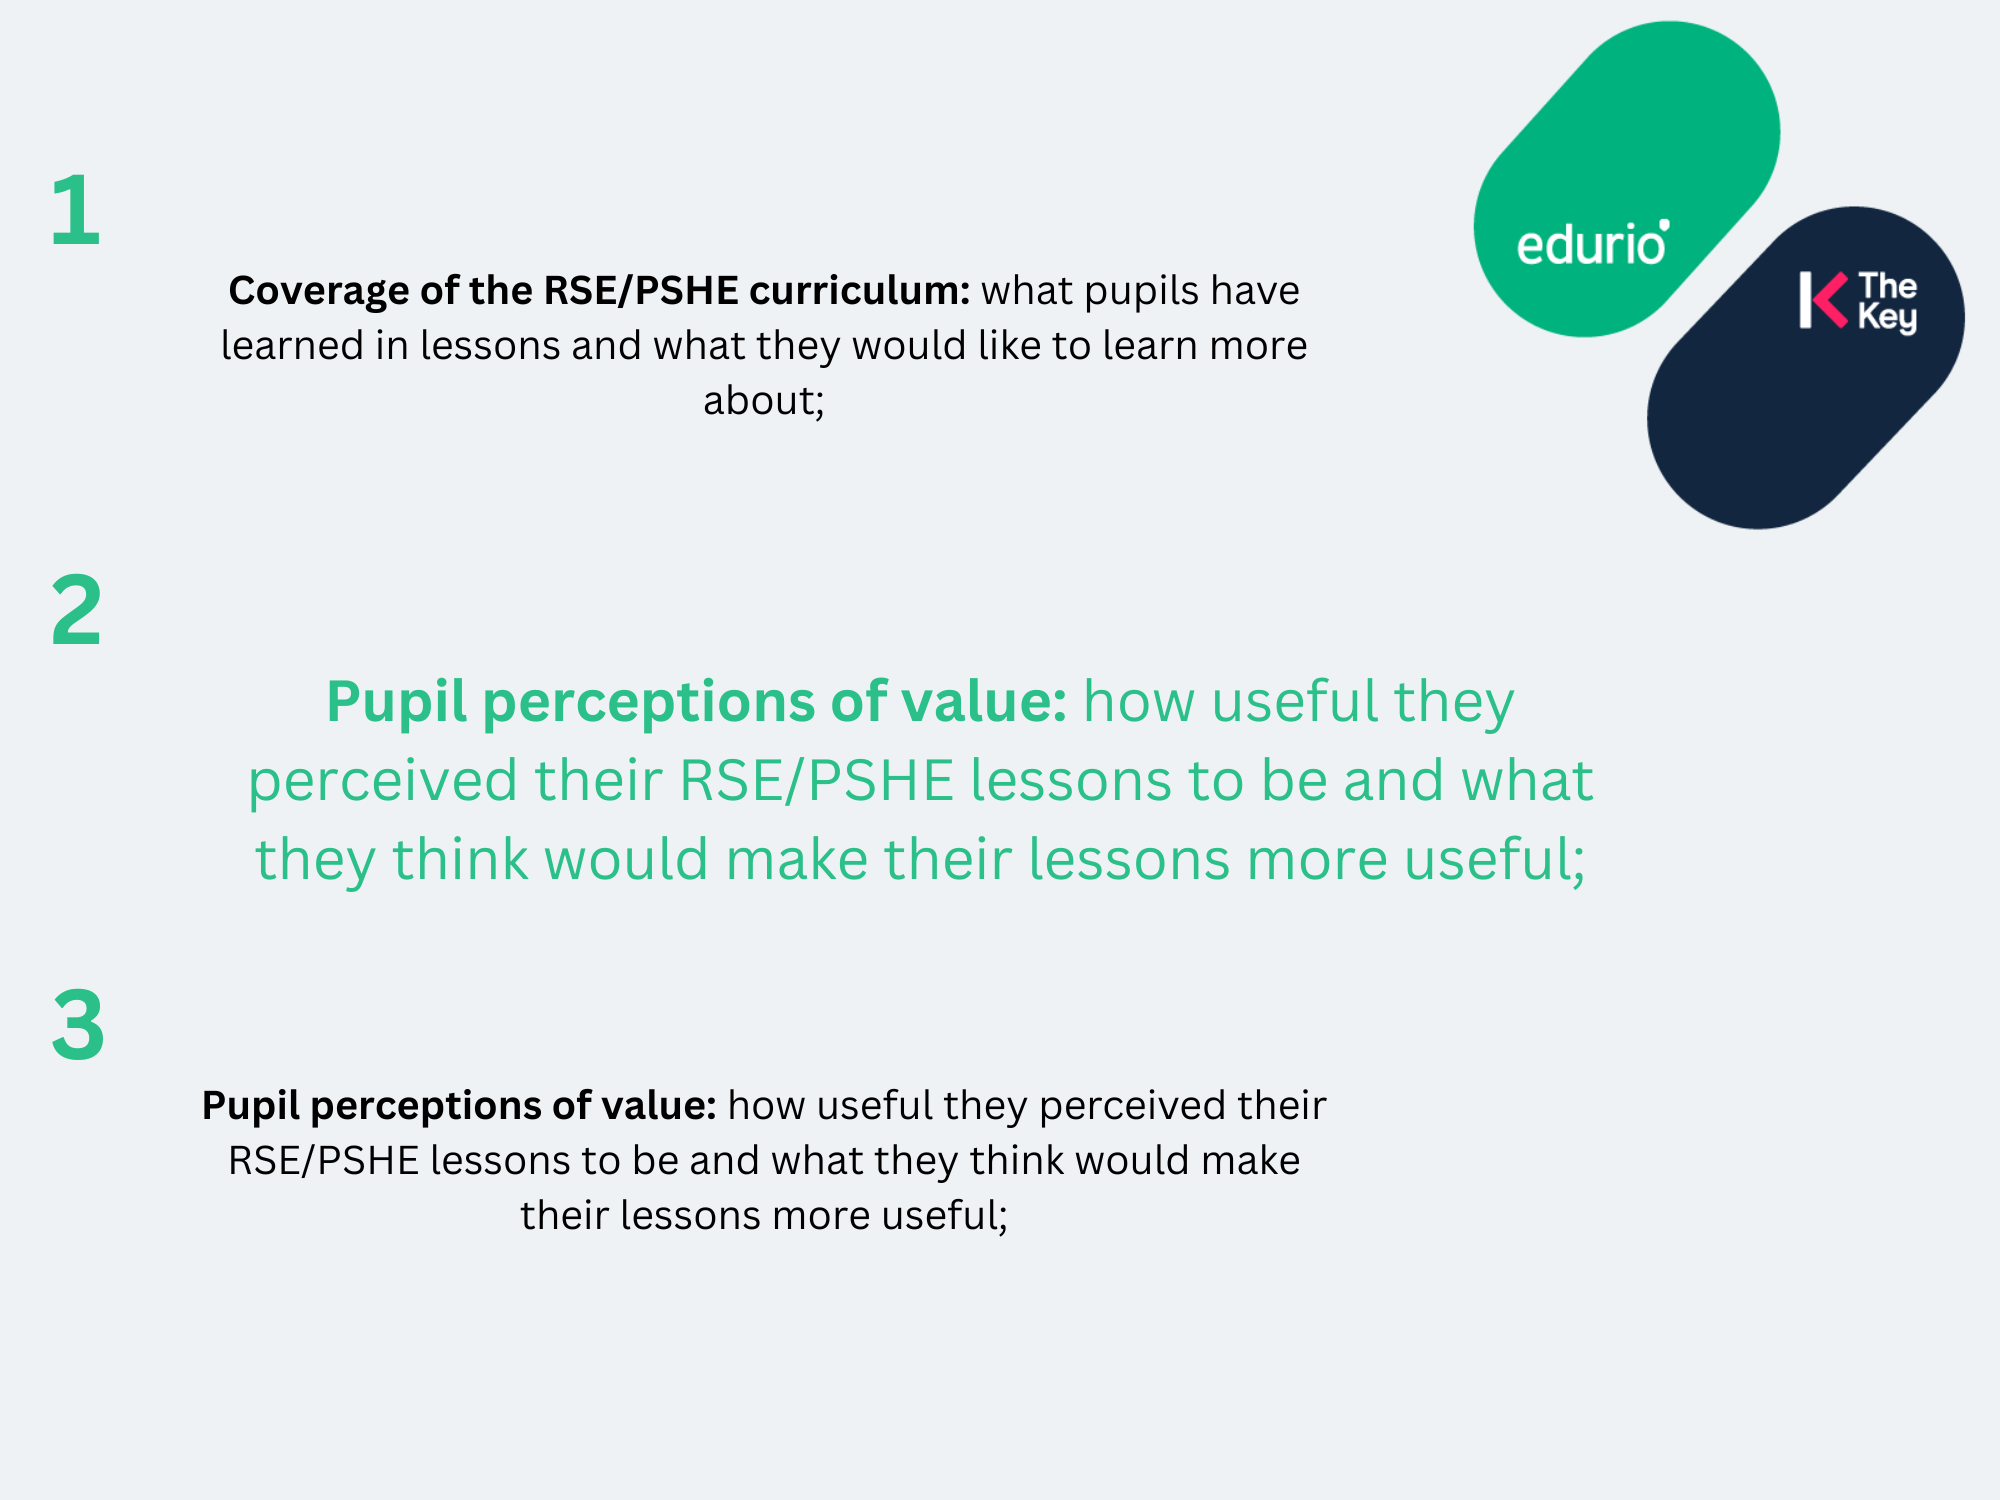 In this image you can see the three things we asked pupils about: 
1) Coverage of the RSE/PSHE curriculum: what pupils have learned in lessons and what they would like to learn more about;
2) Pupil perceptions of value: how useful they perceived their RSE/PSHE lessons to be and what they think would make their lessons more useful;
3) Support from teachers: how often their teachers could answer their questions on RSE and the types of questions teachers couldn't answer.